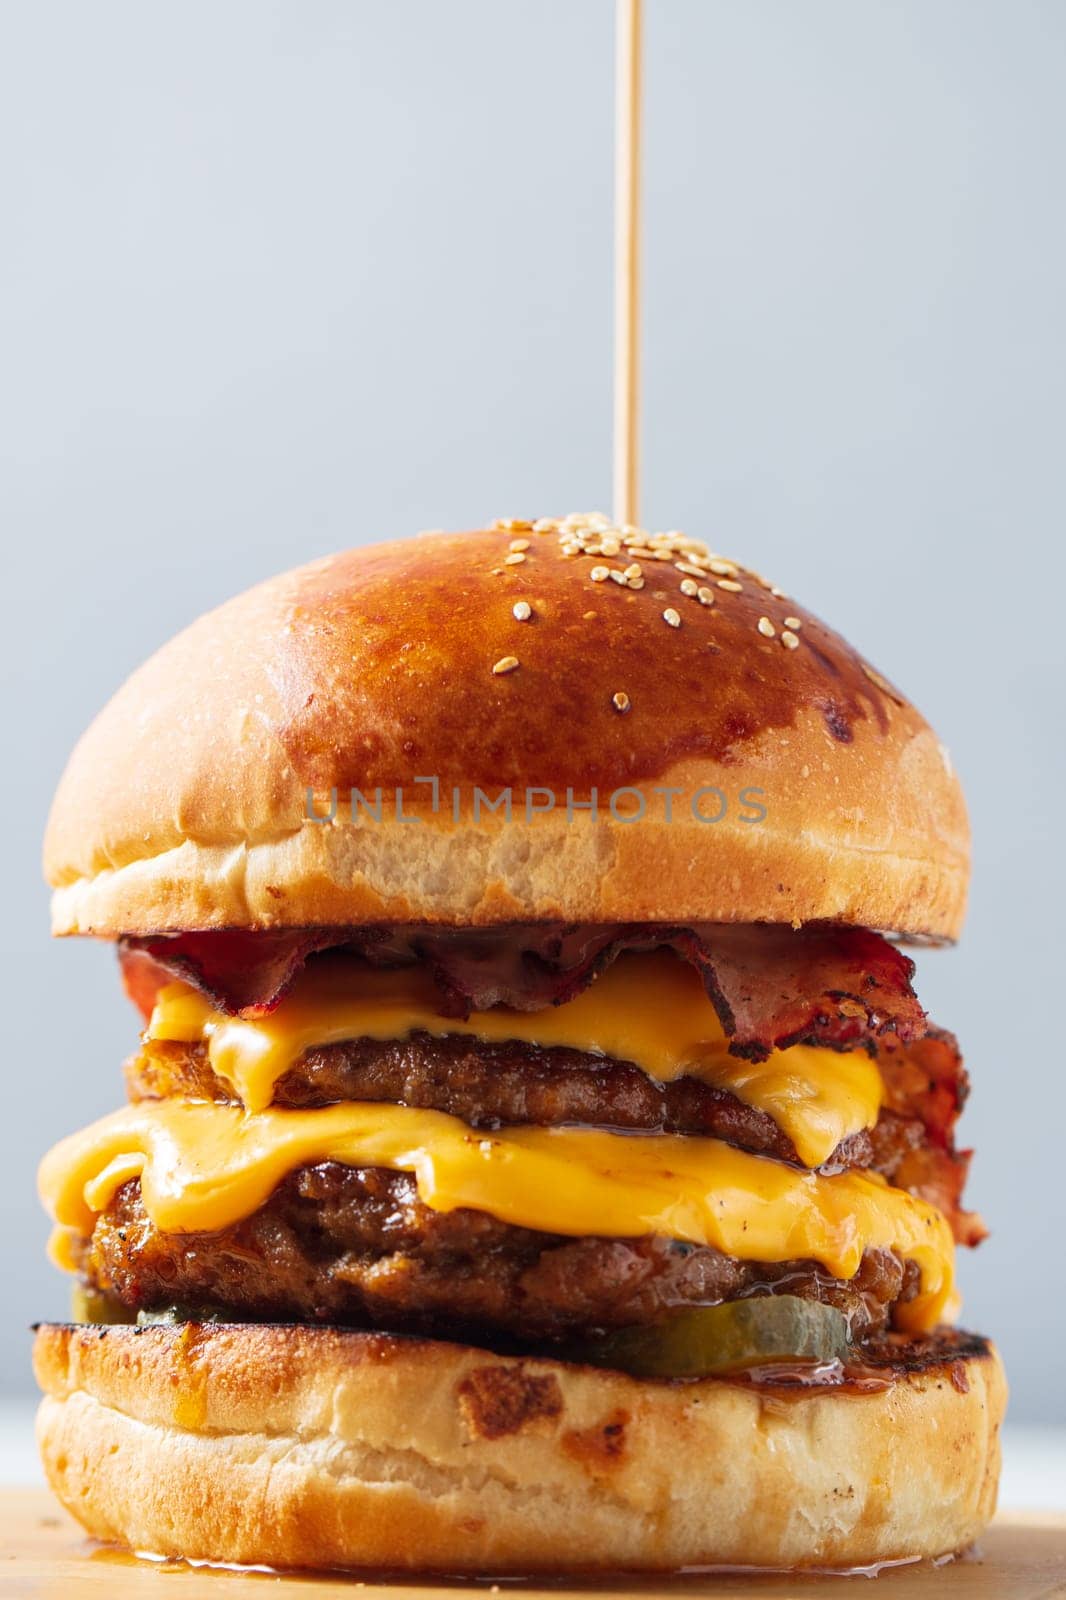 Burger. Double cutlet, double cheddar cheese, bacon, deep-fried onions, pickles, sauce and craft bun. by senkaya